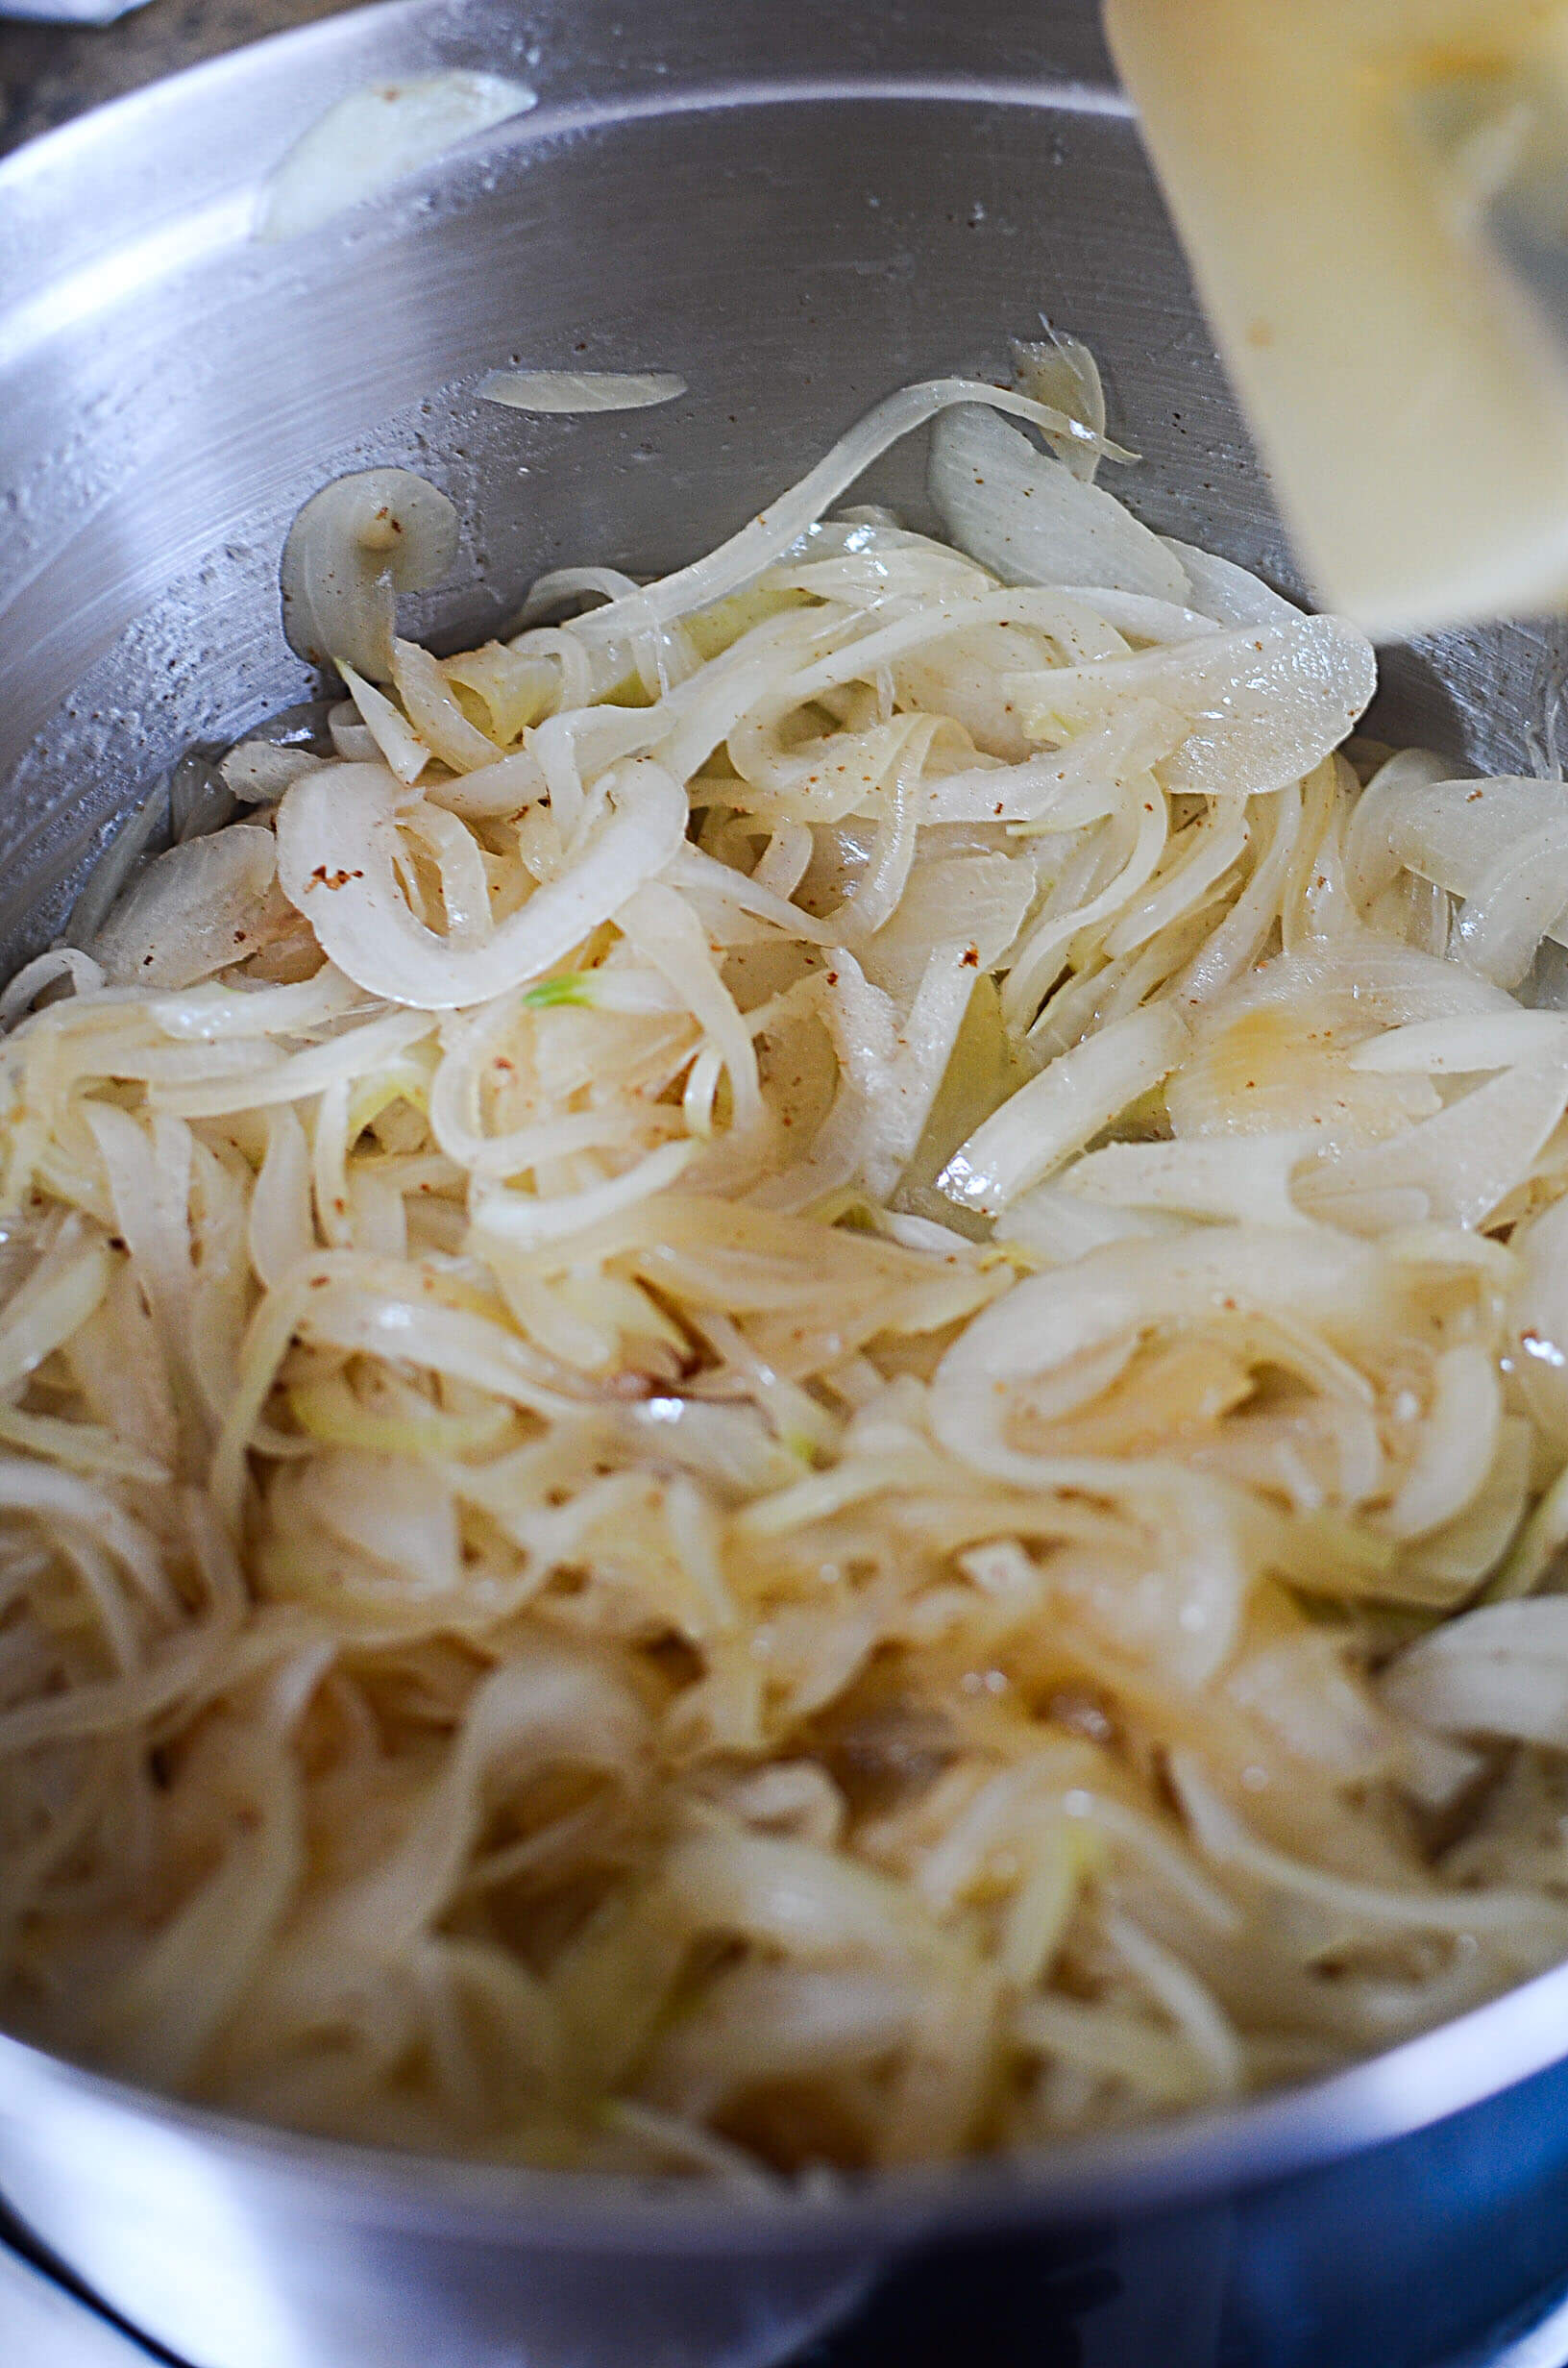 Onions beginning to get some color through caramelization. 